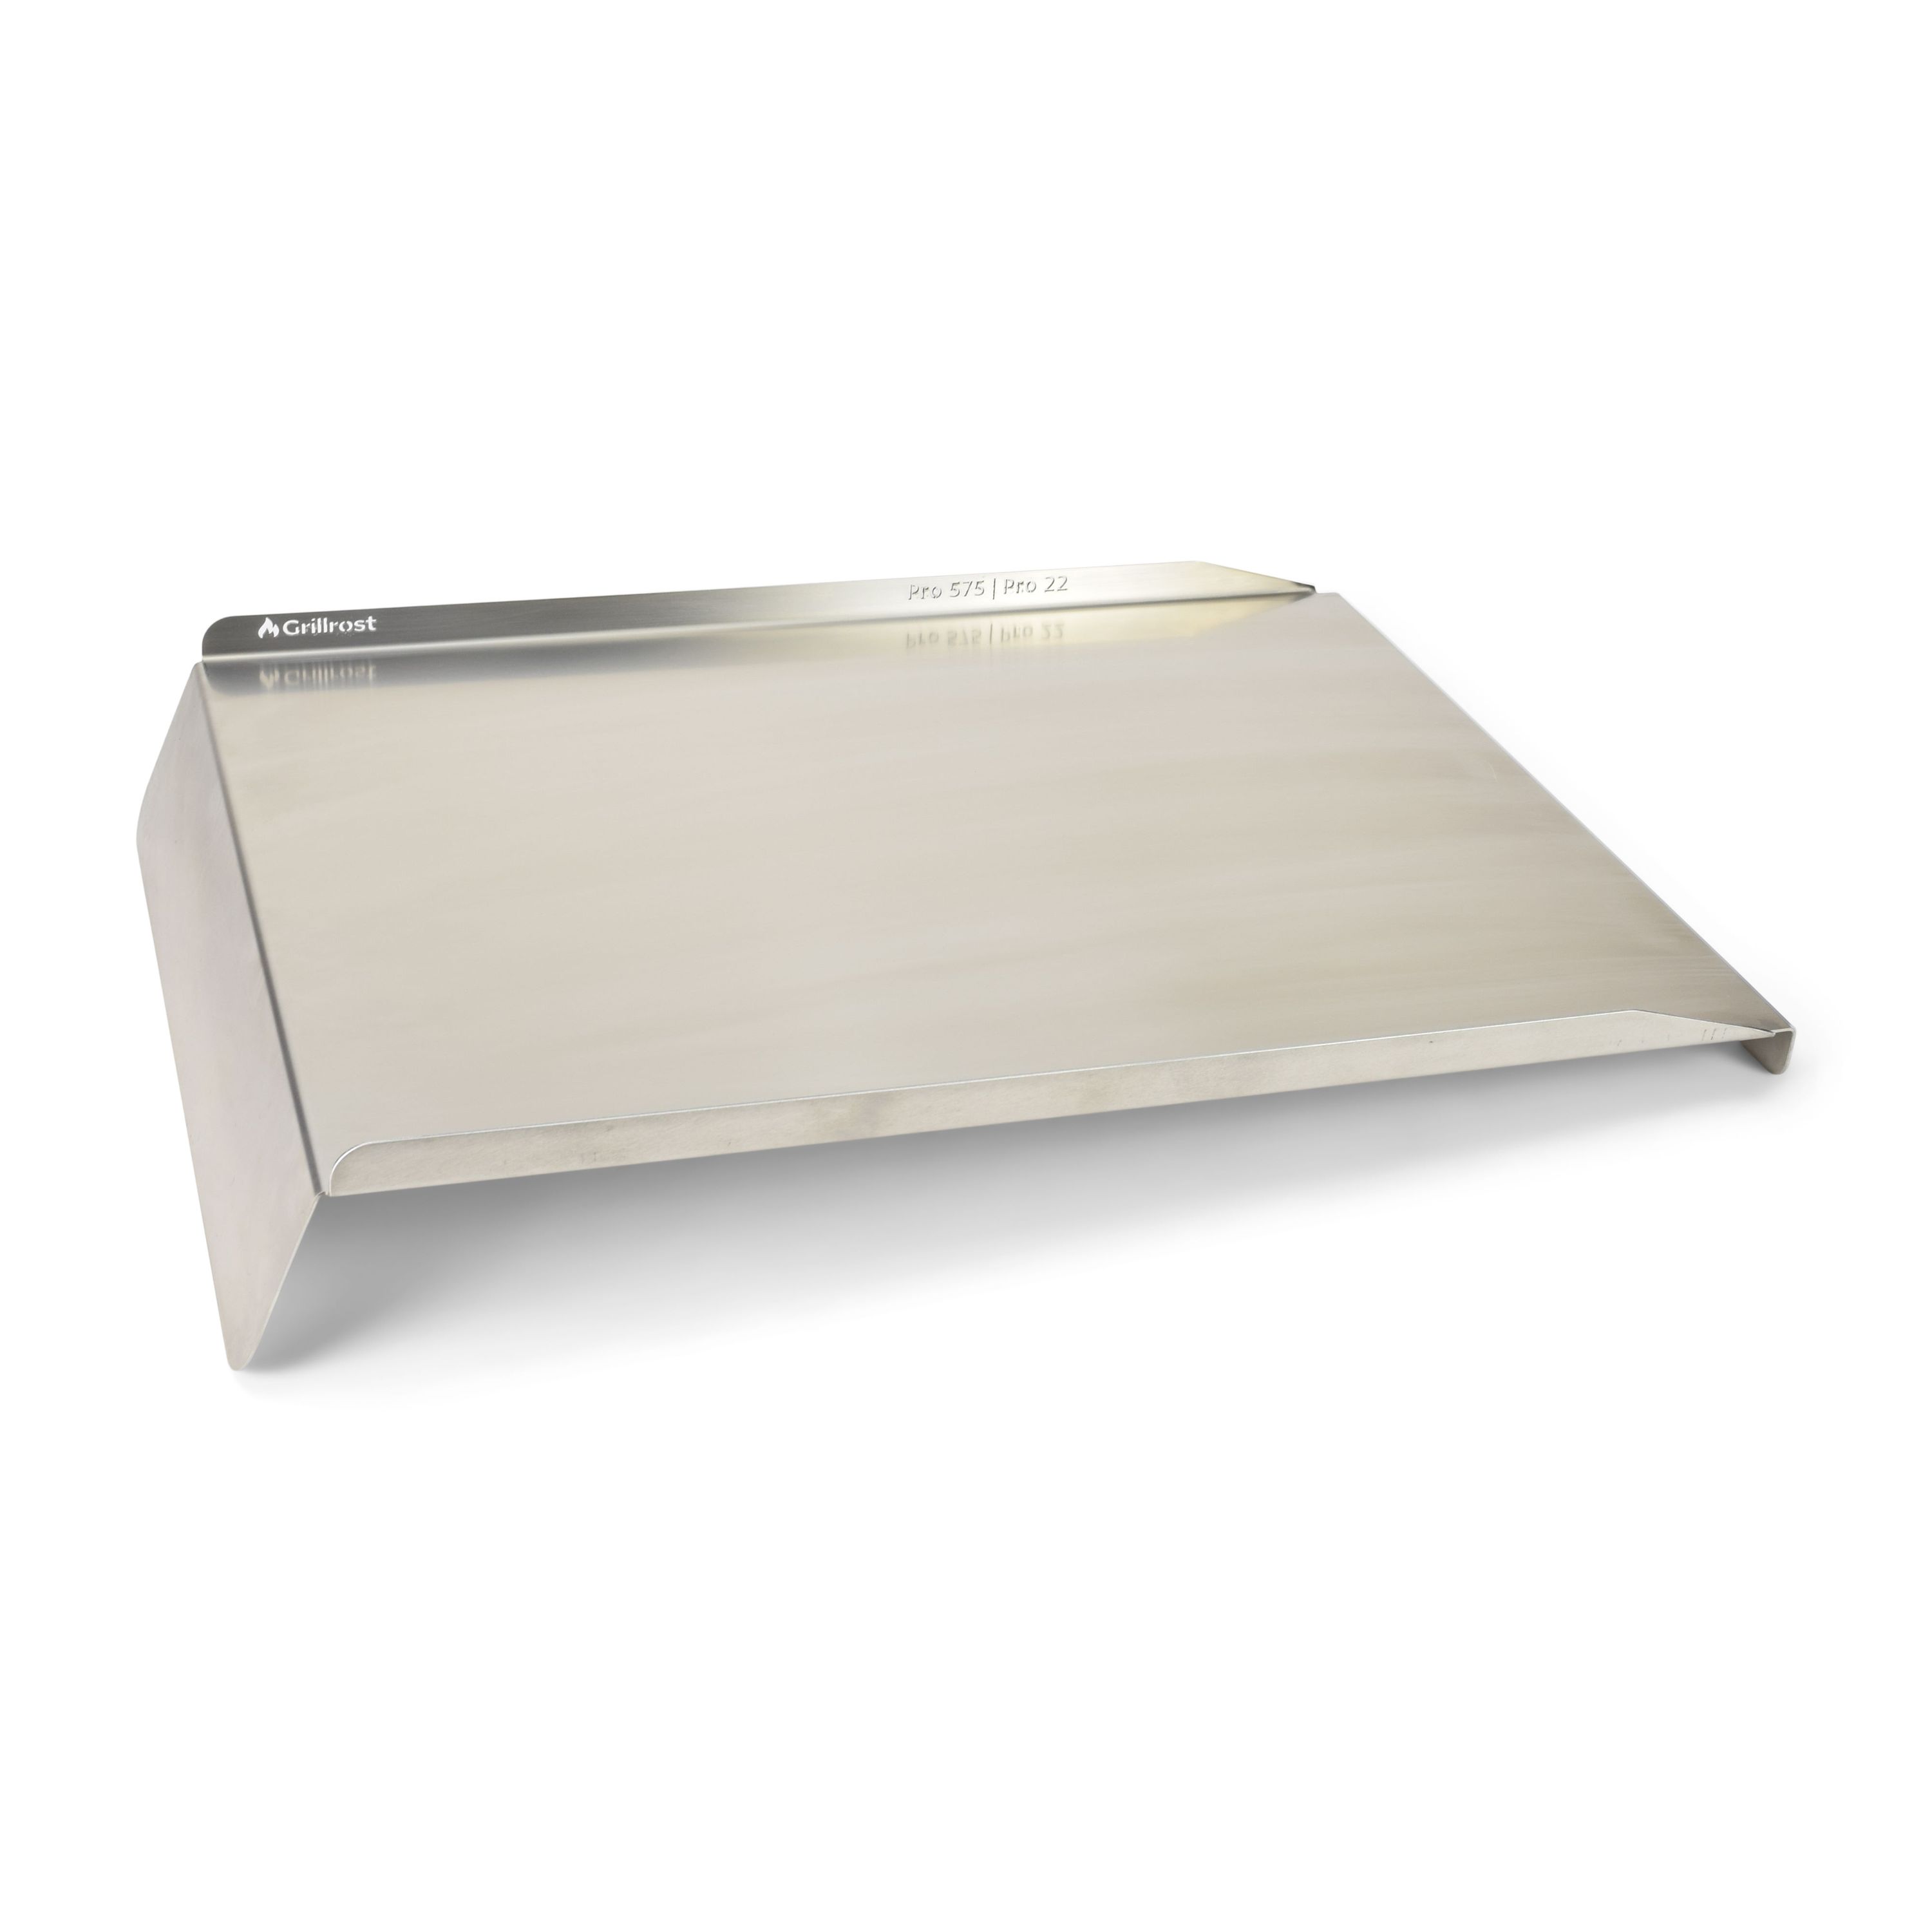 Stainless steel grease drain plate for carrier Pro Series 22 & 575